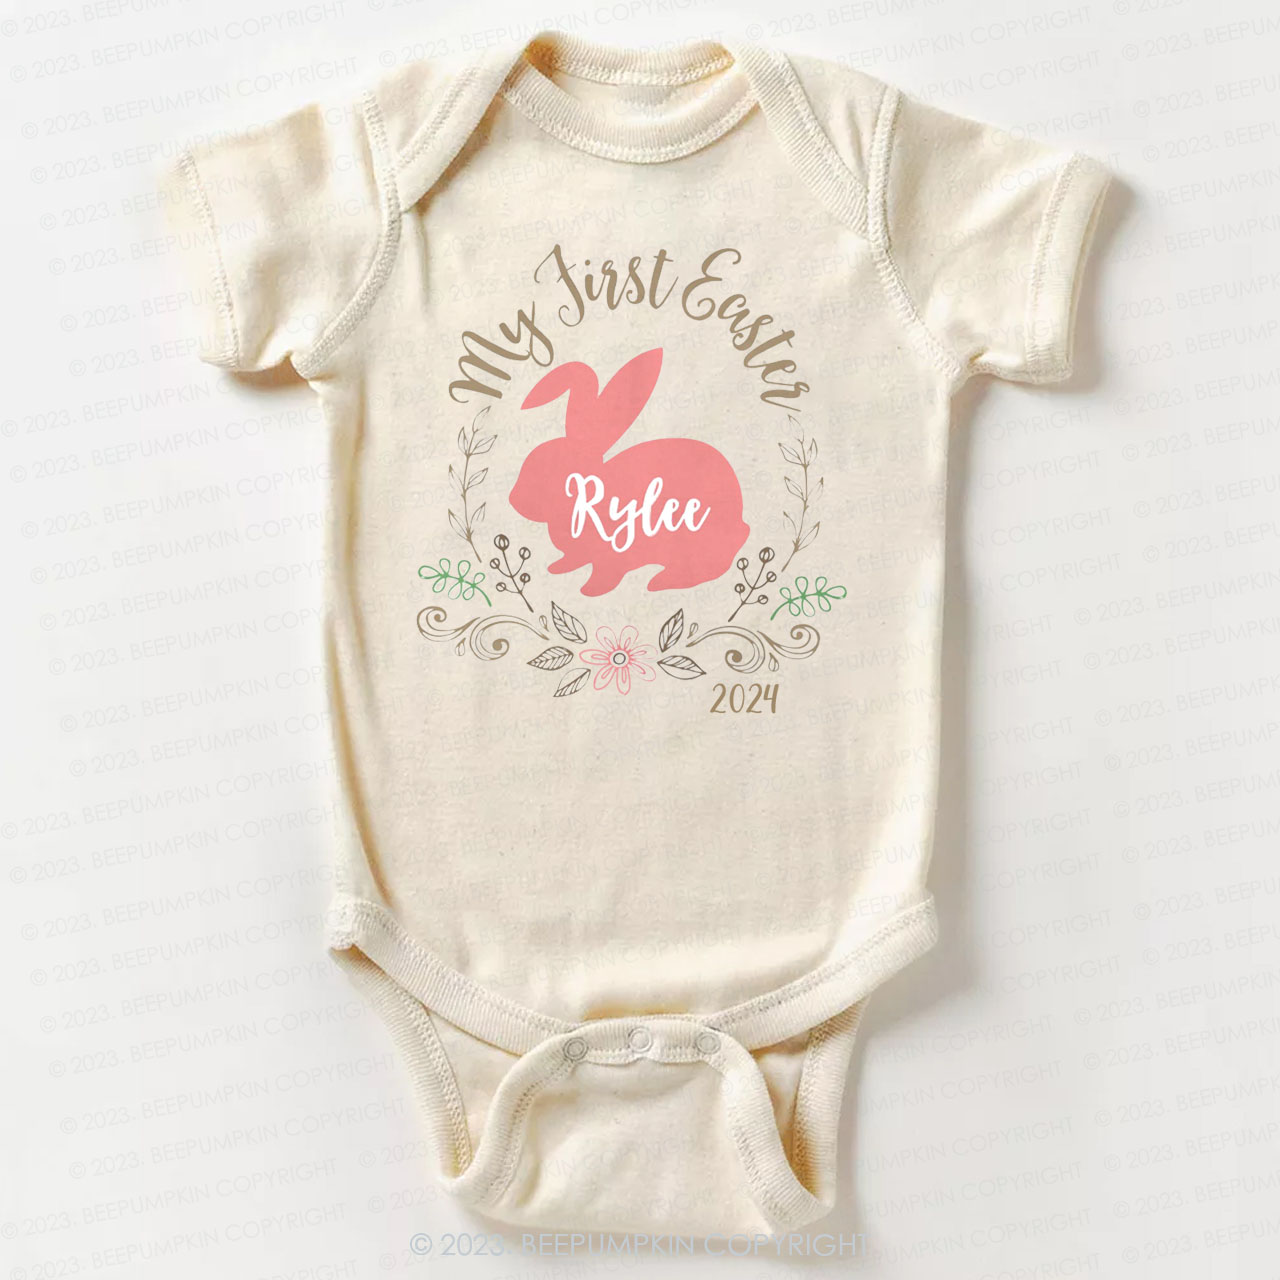 My First Easte Adorable Personalized Bodysuit For Baby